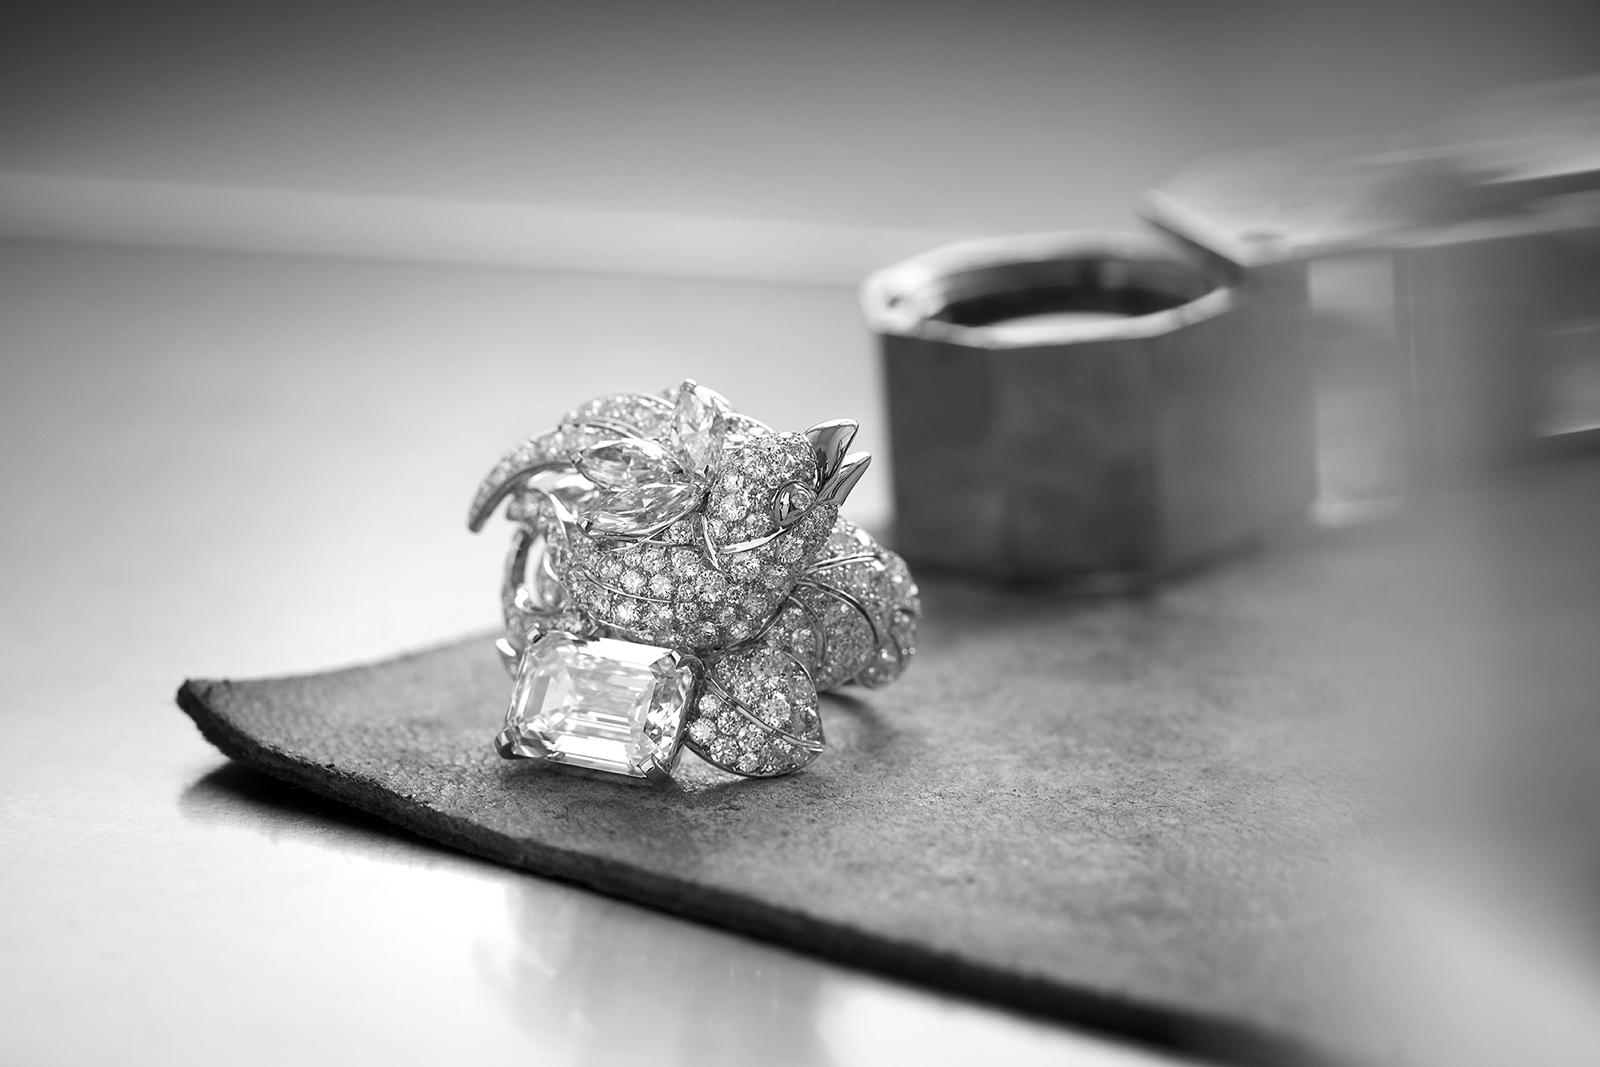 Chanel 'Précieux Envol' ring from the ‘Coromandel’ collection in white gold and diamonds